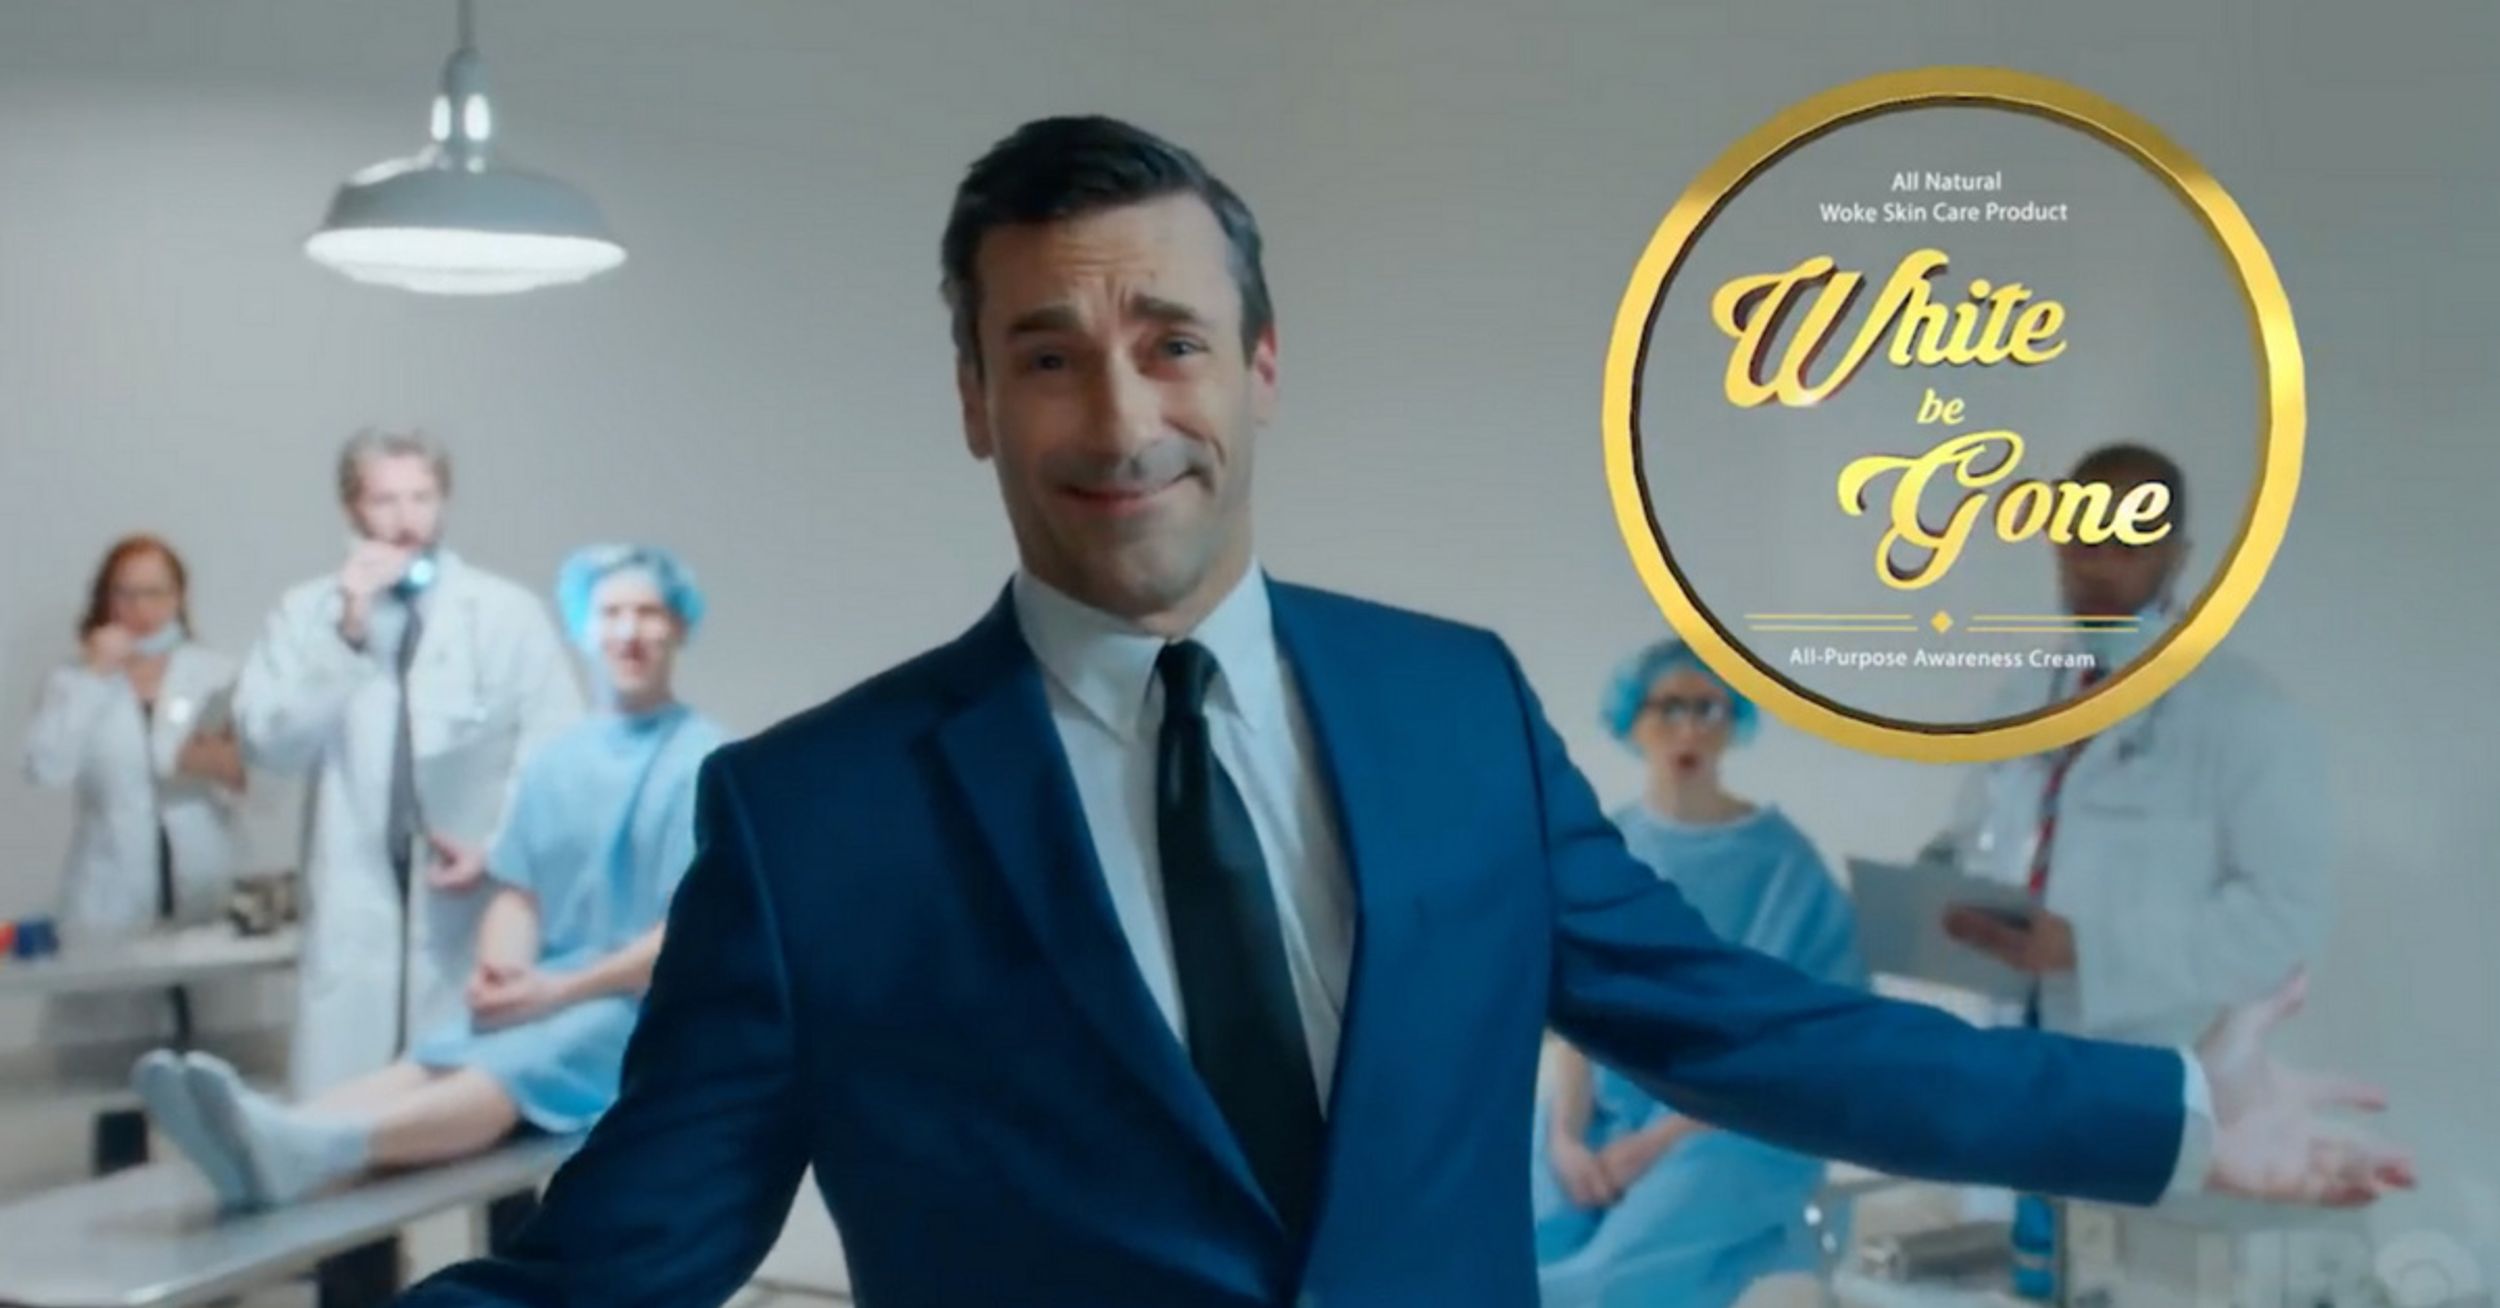 Jon Hamm Is Here With An Infomercial To Help You Get Rid Of Those Troubling 'White Thoughts' 😂